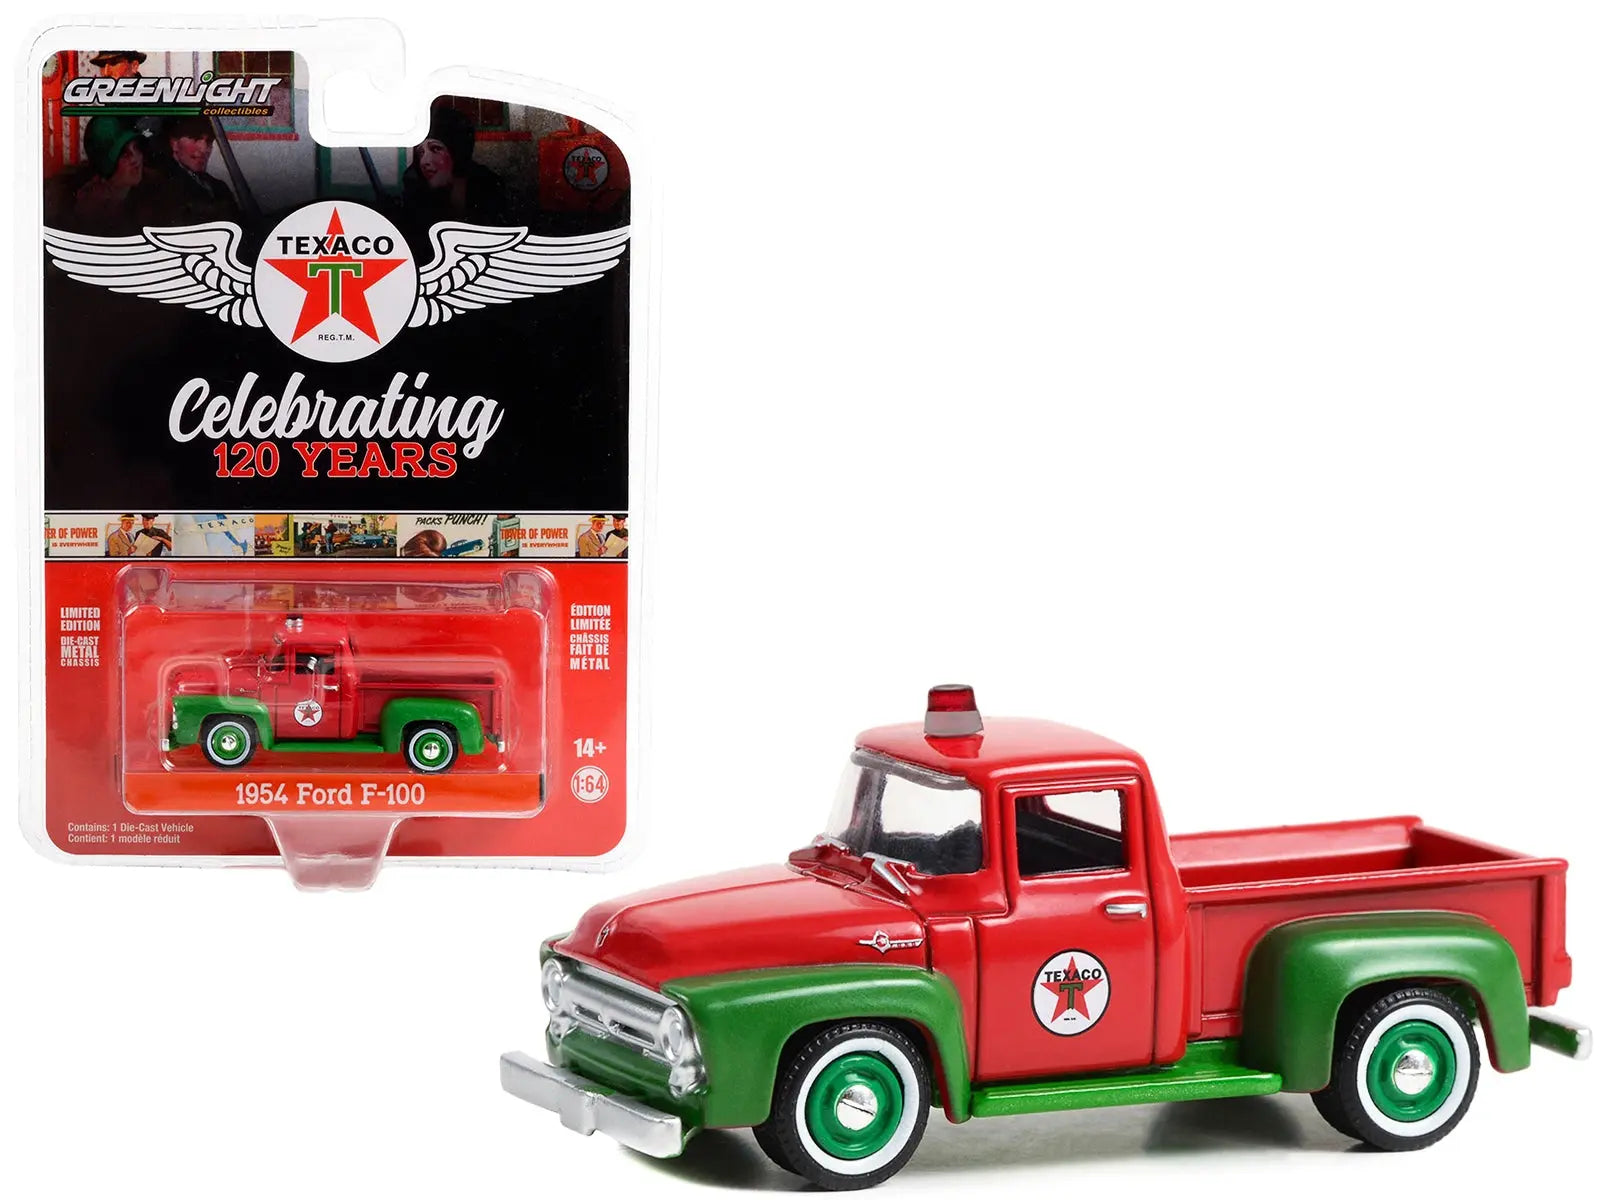 1954 Ford F-100 Pickup Truck Red and Green "Texaco Celebrating 120 Years" "Anniversary Collection" Series 15 1/64 Diecast Model Car by Greenlight Greenlight